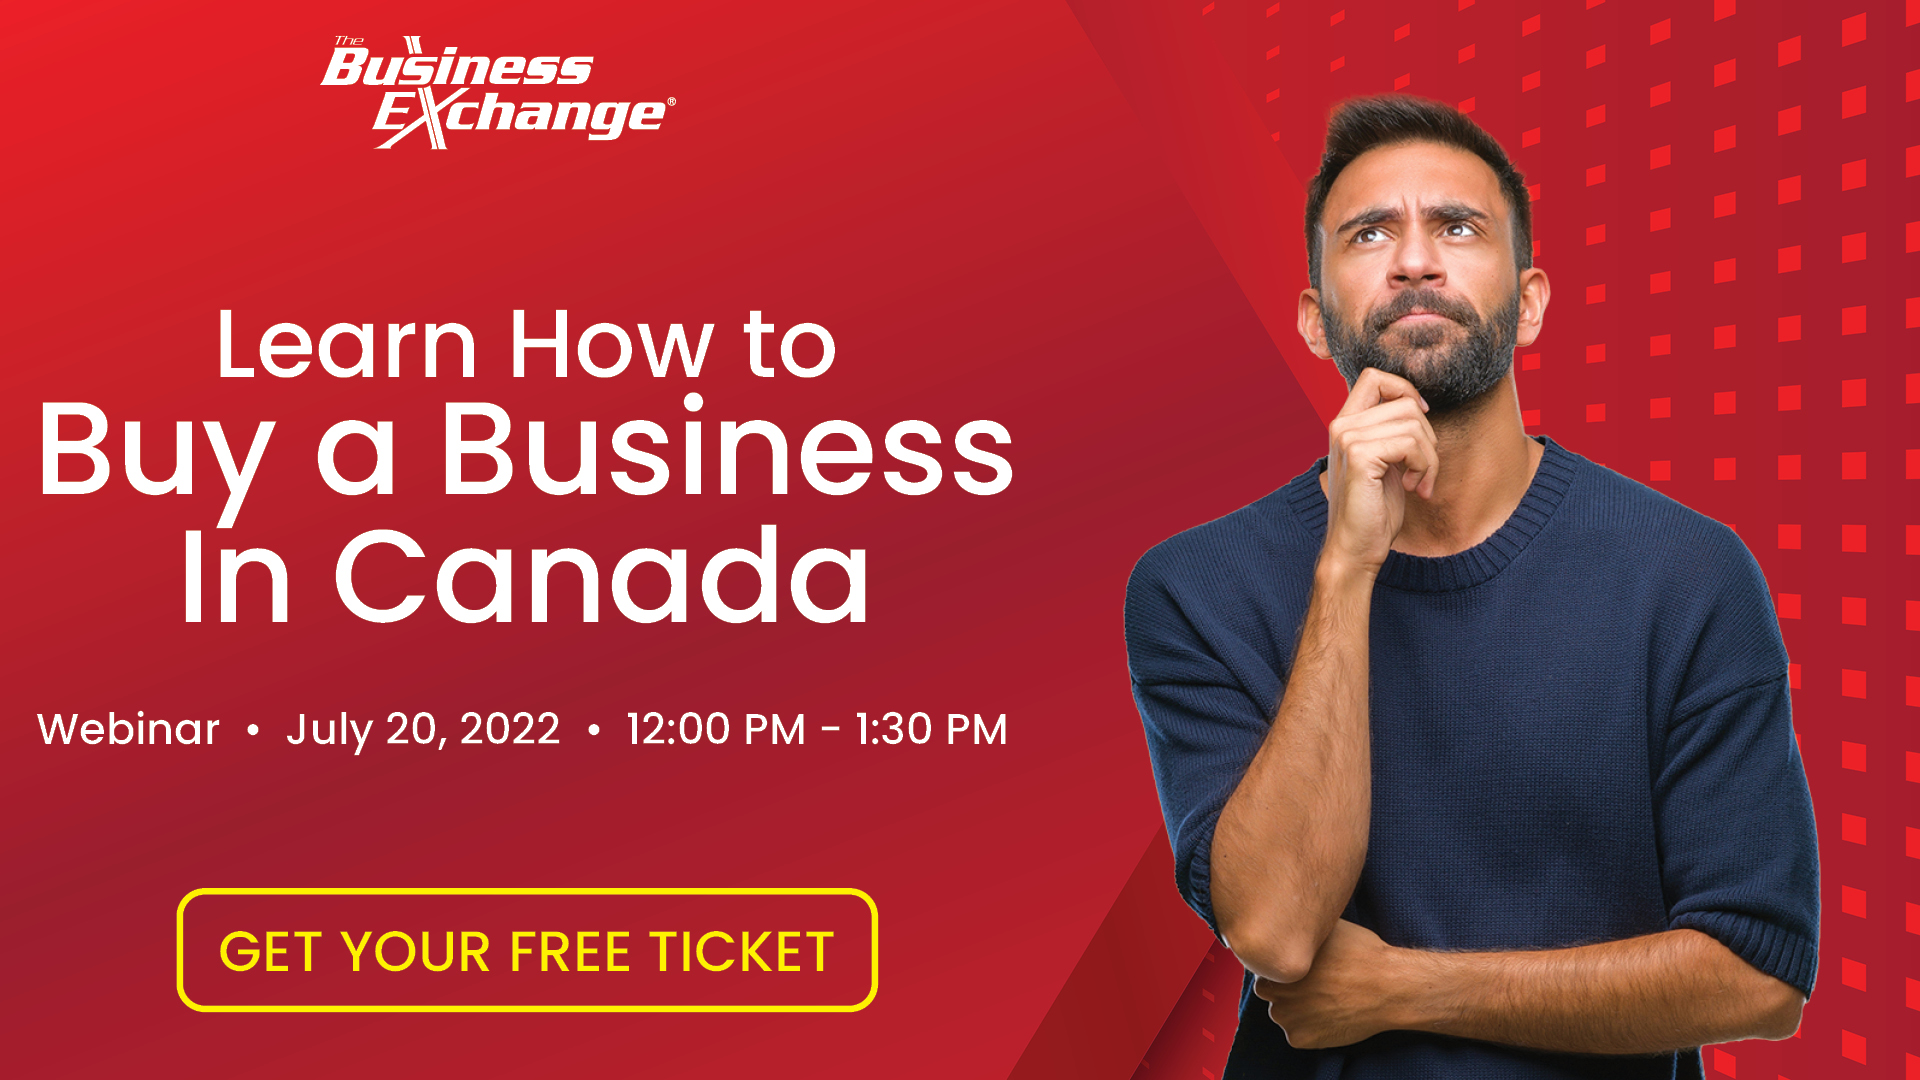 Learn How To Buy a Business in Canada! Logo